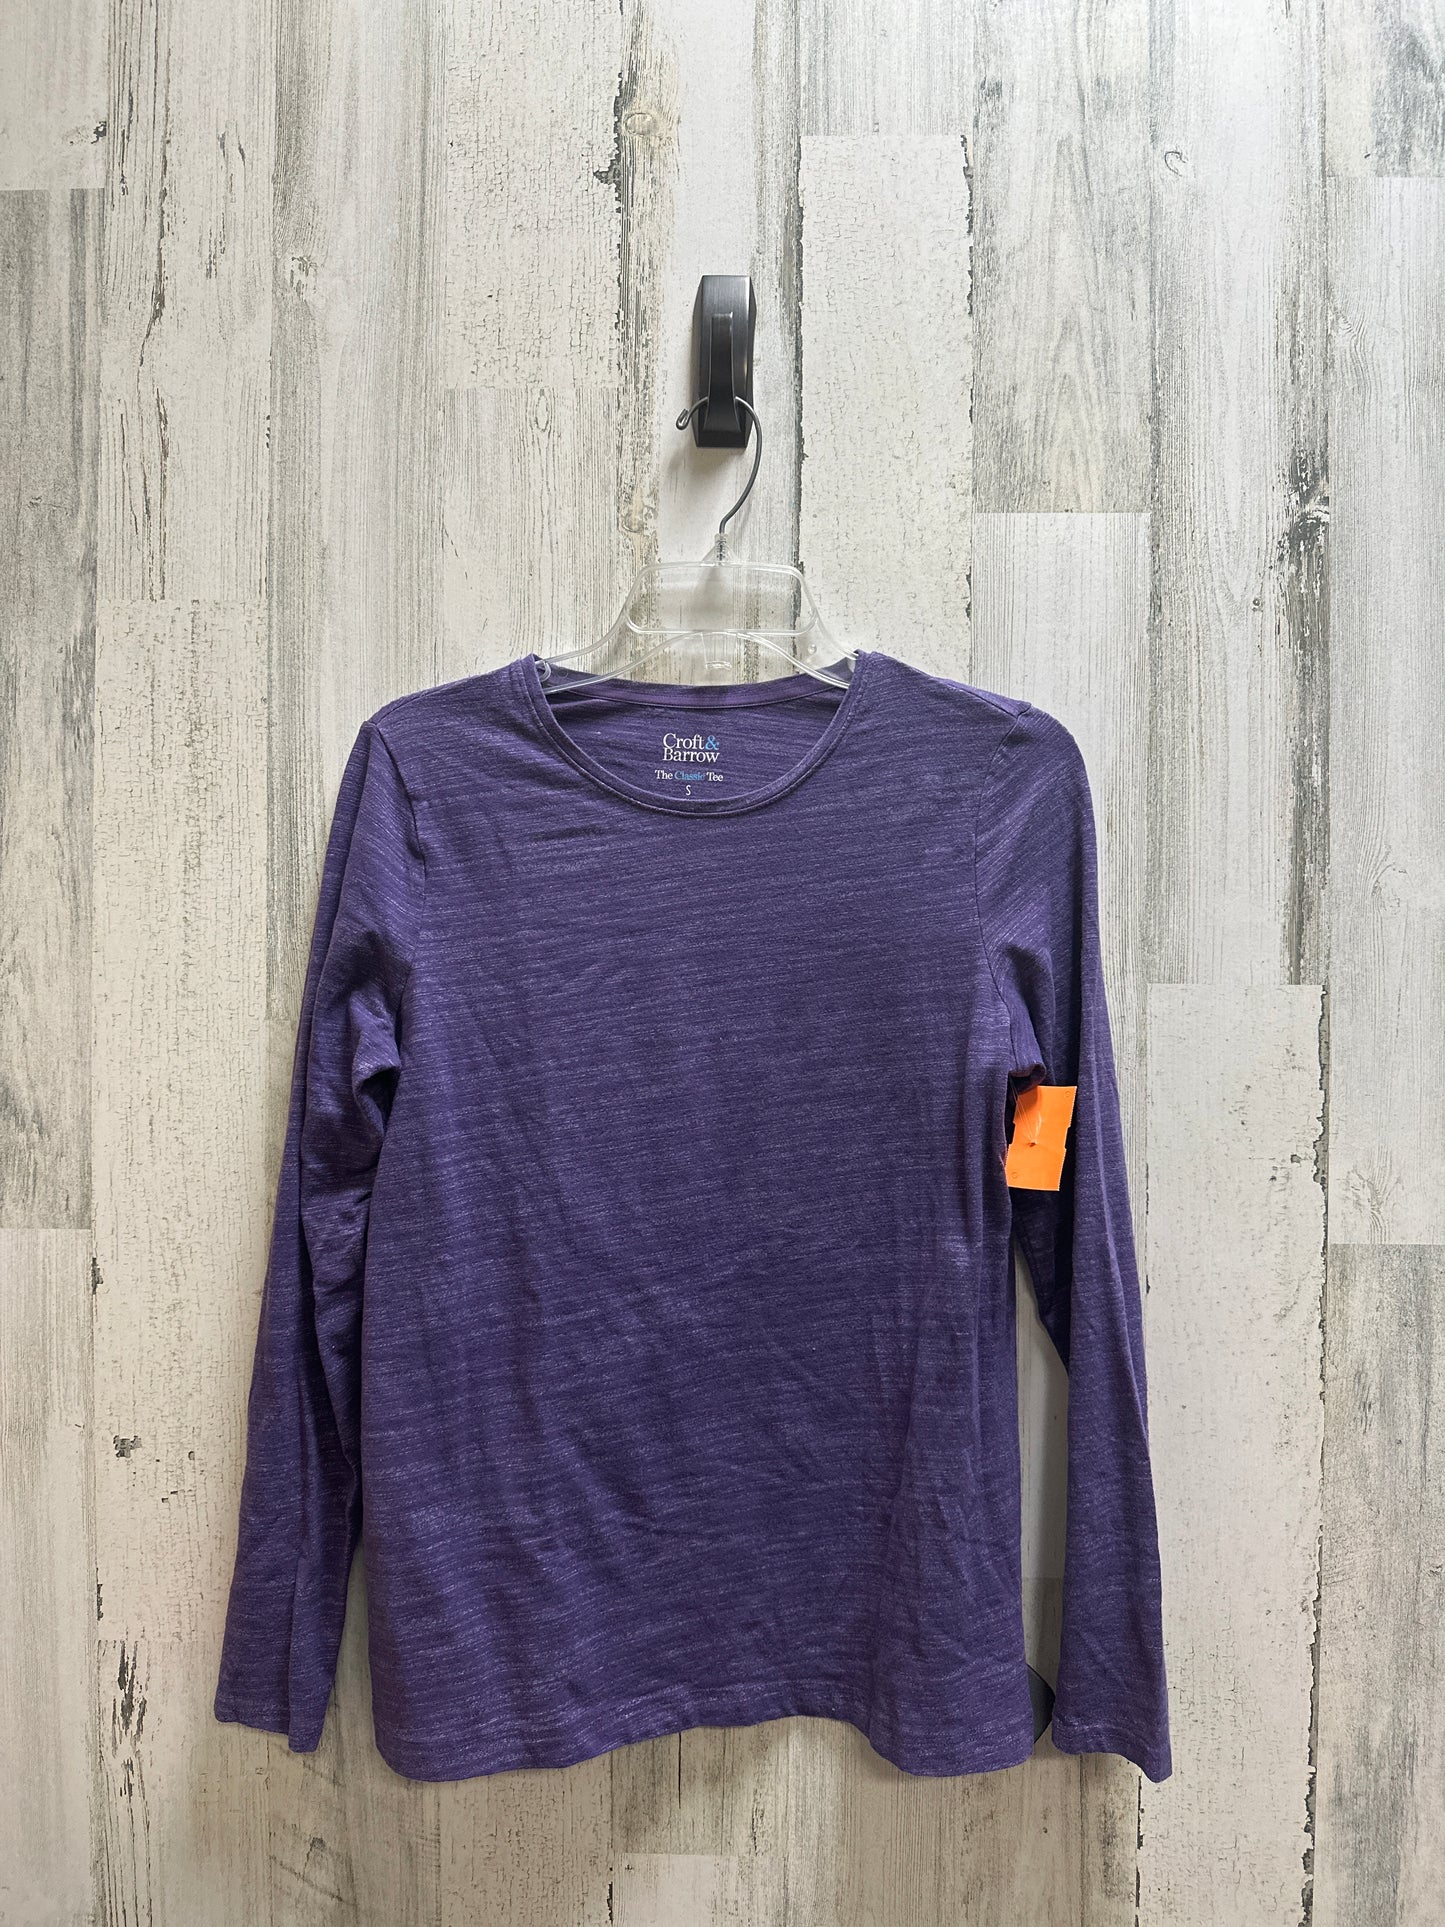 Top Long Sleeve Basic By Croft And Barrow  Size: S